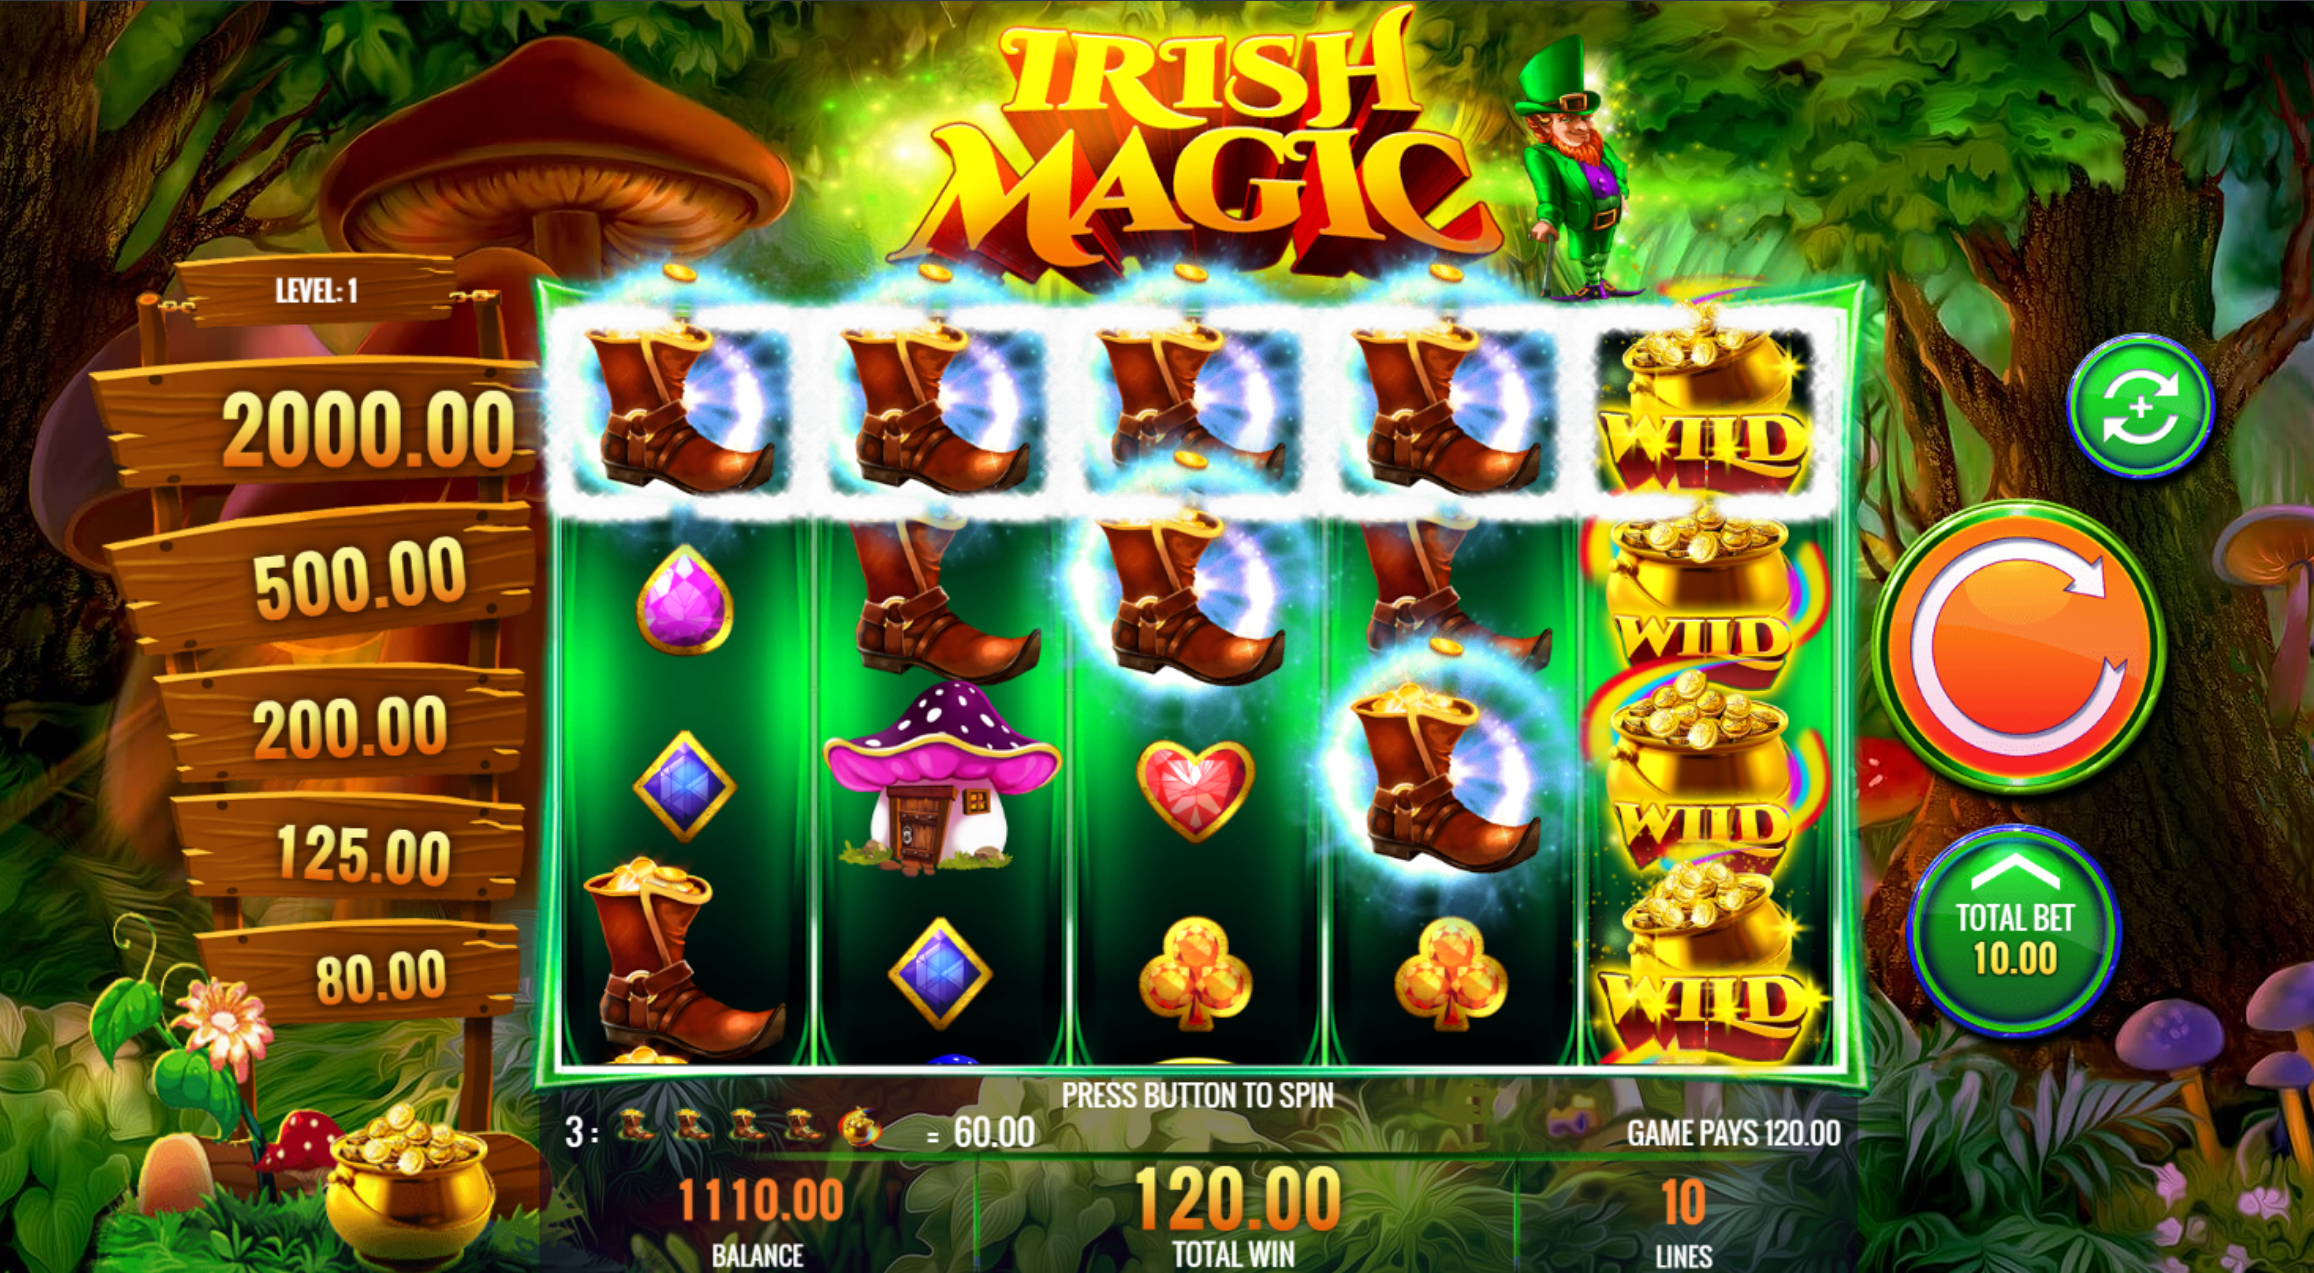  slot theme with four-leaf clovers, toadstool houses, horseshoes, pots of gold and leprechaun symbols. The backdrop features toadstools and trees. The jeweled playing cards, tear-shaped gems, and circles 